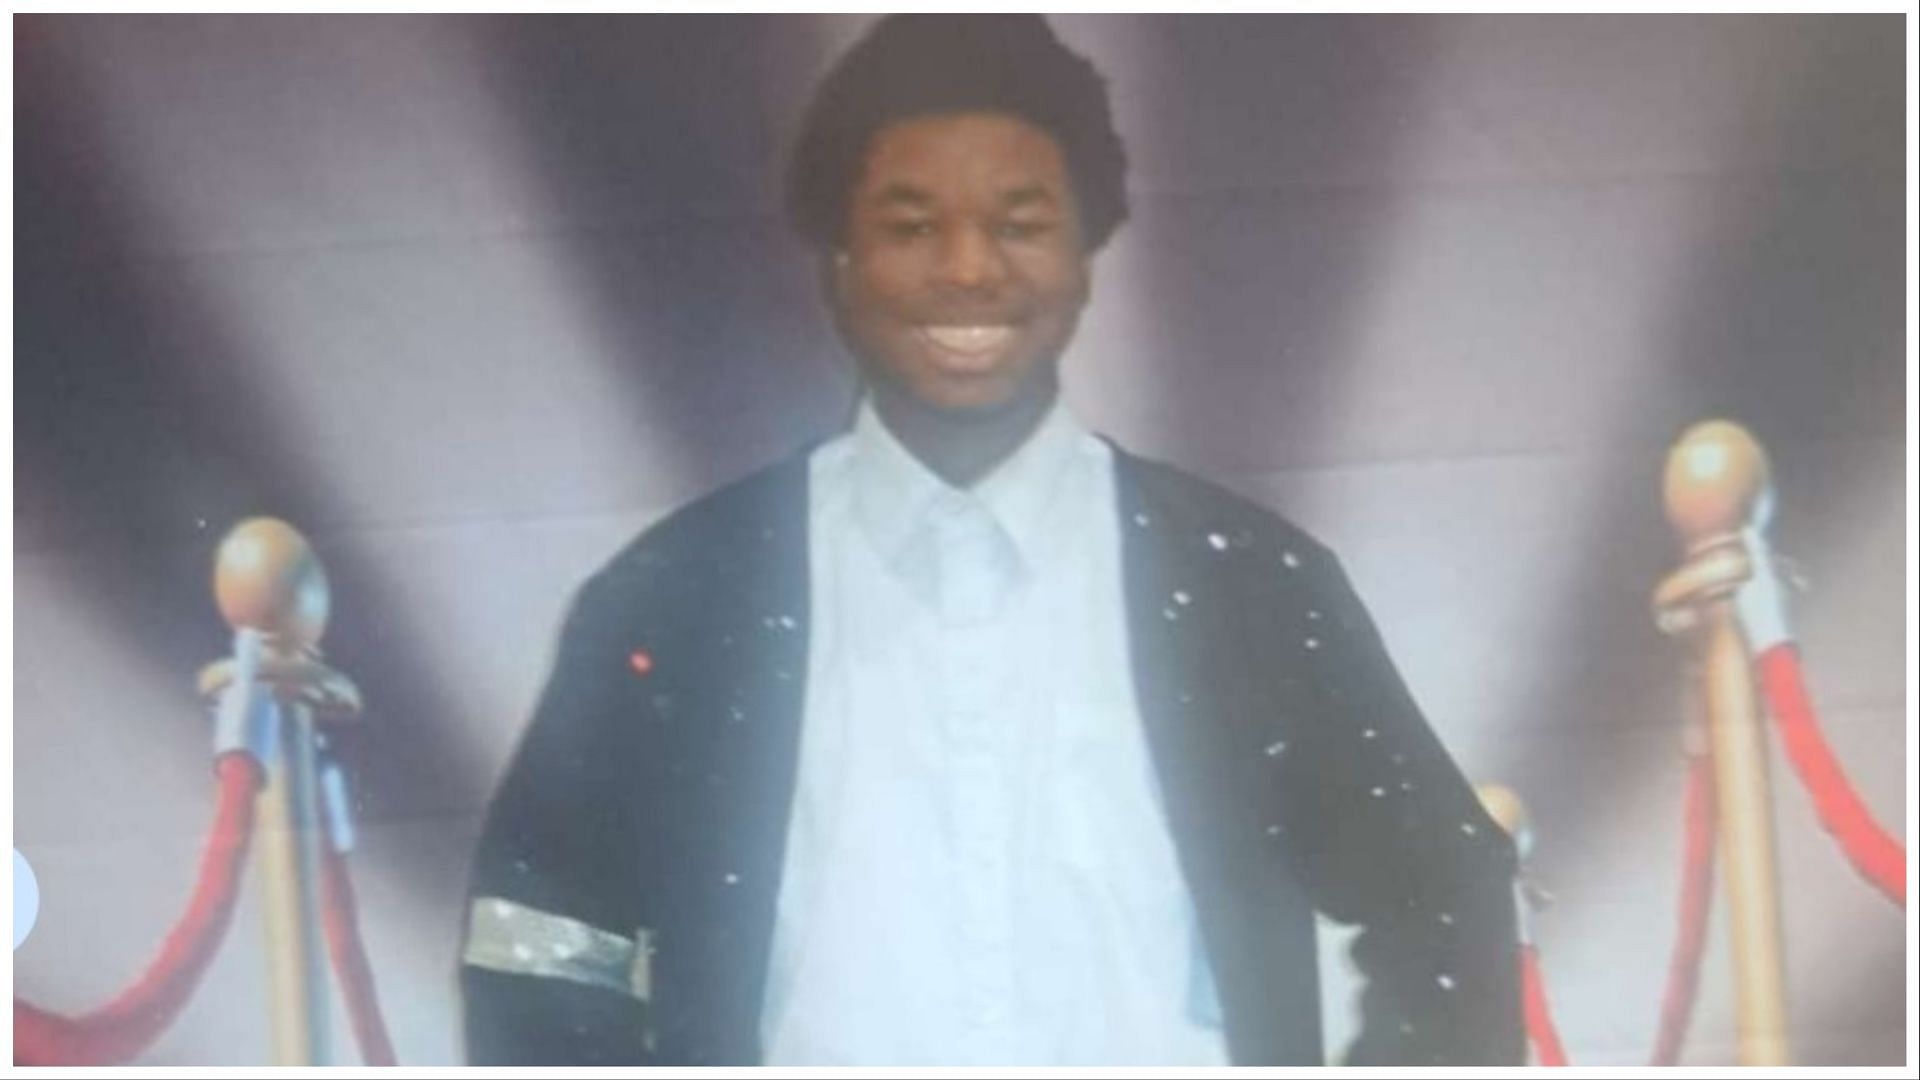 Marcellus Isom has been found safe, (Image via Greenville, NC Police Department/Facebook) 